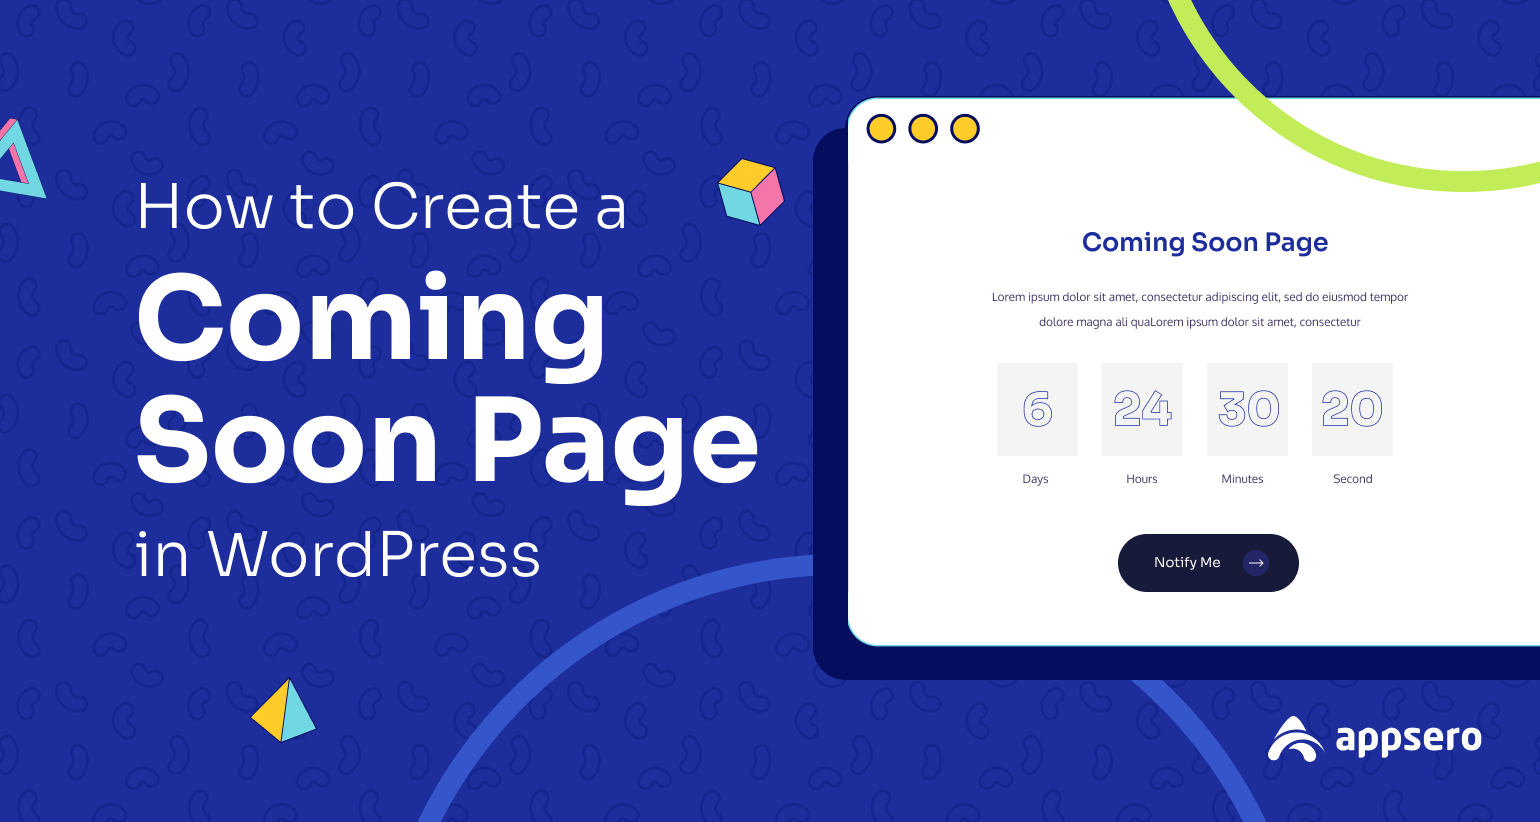 How to Create a Coming Soon Page in WordPress: 2 Easy Methods